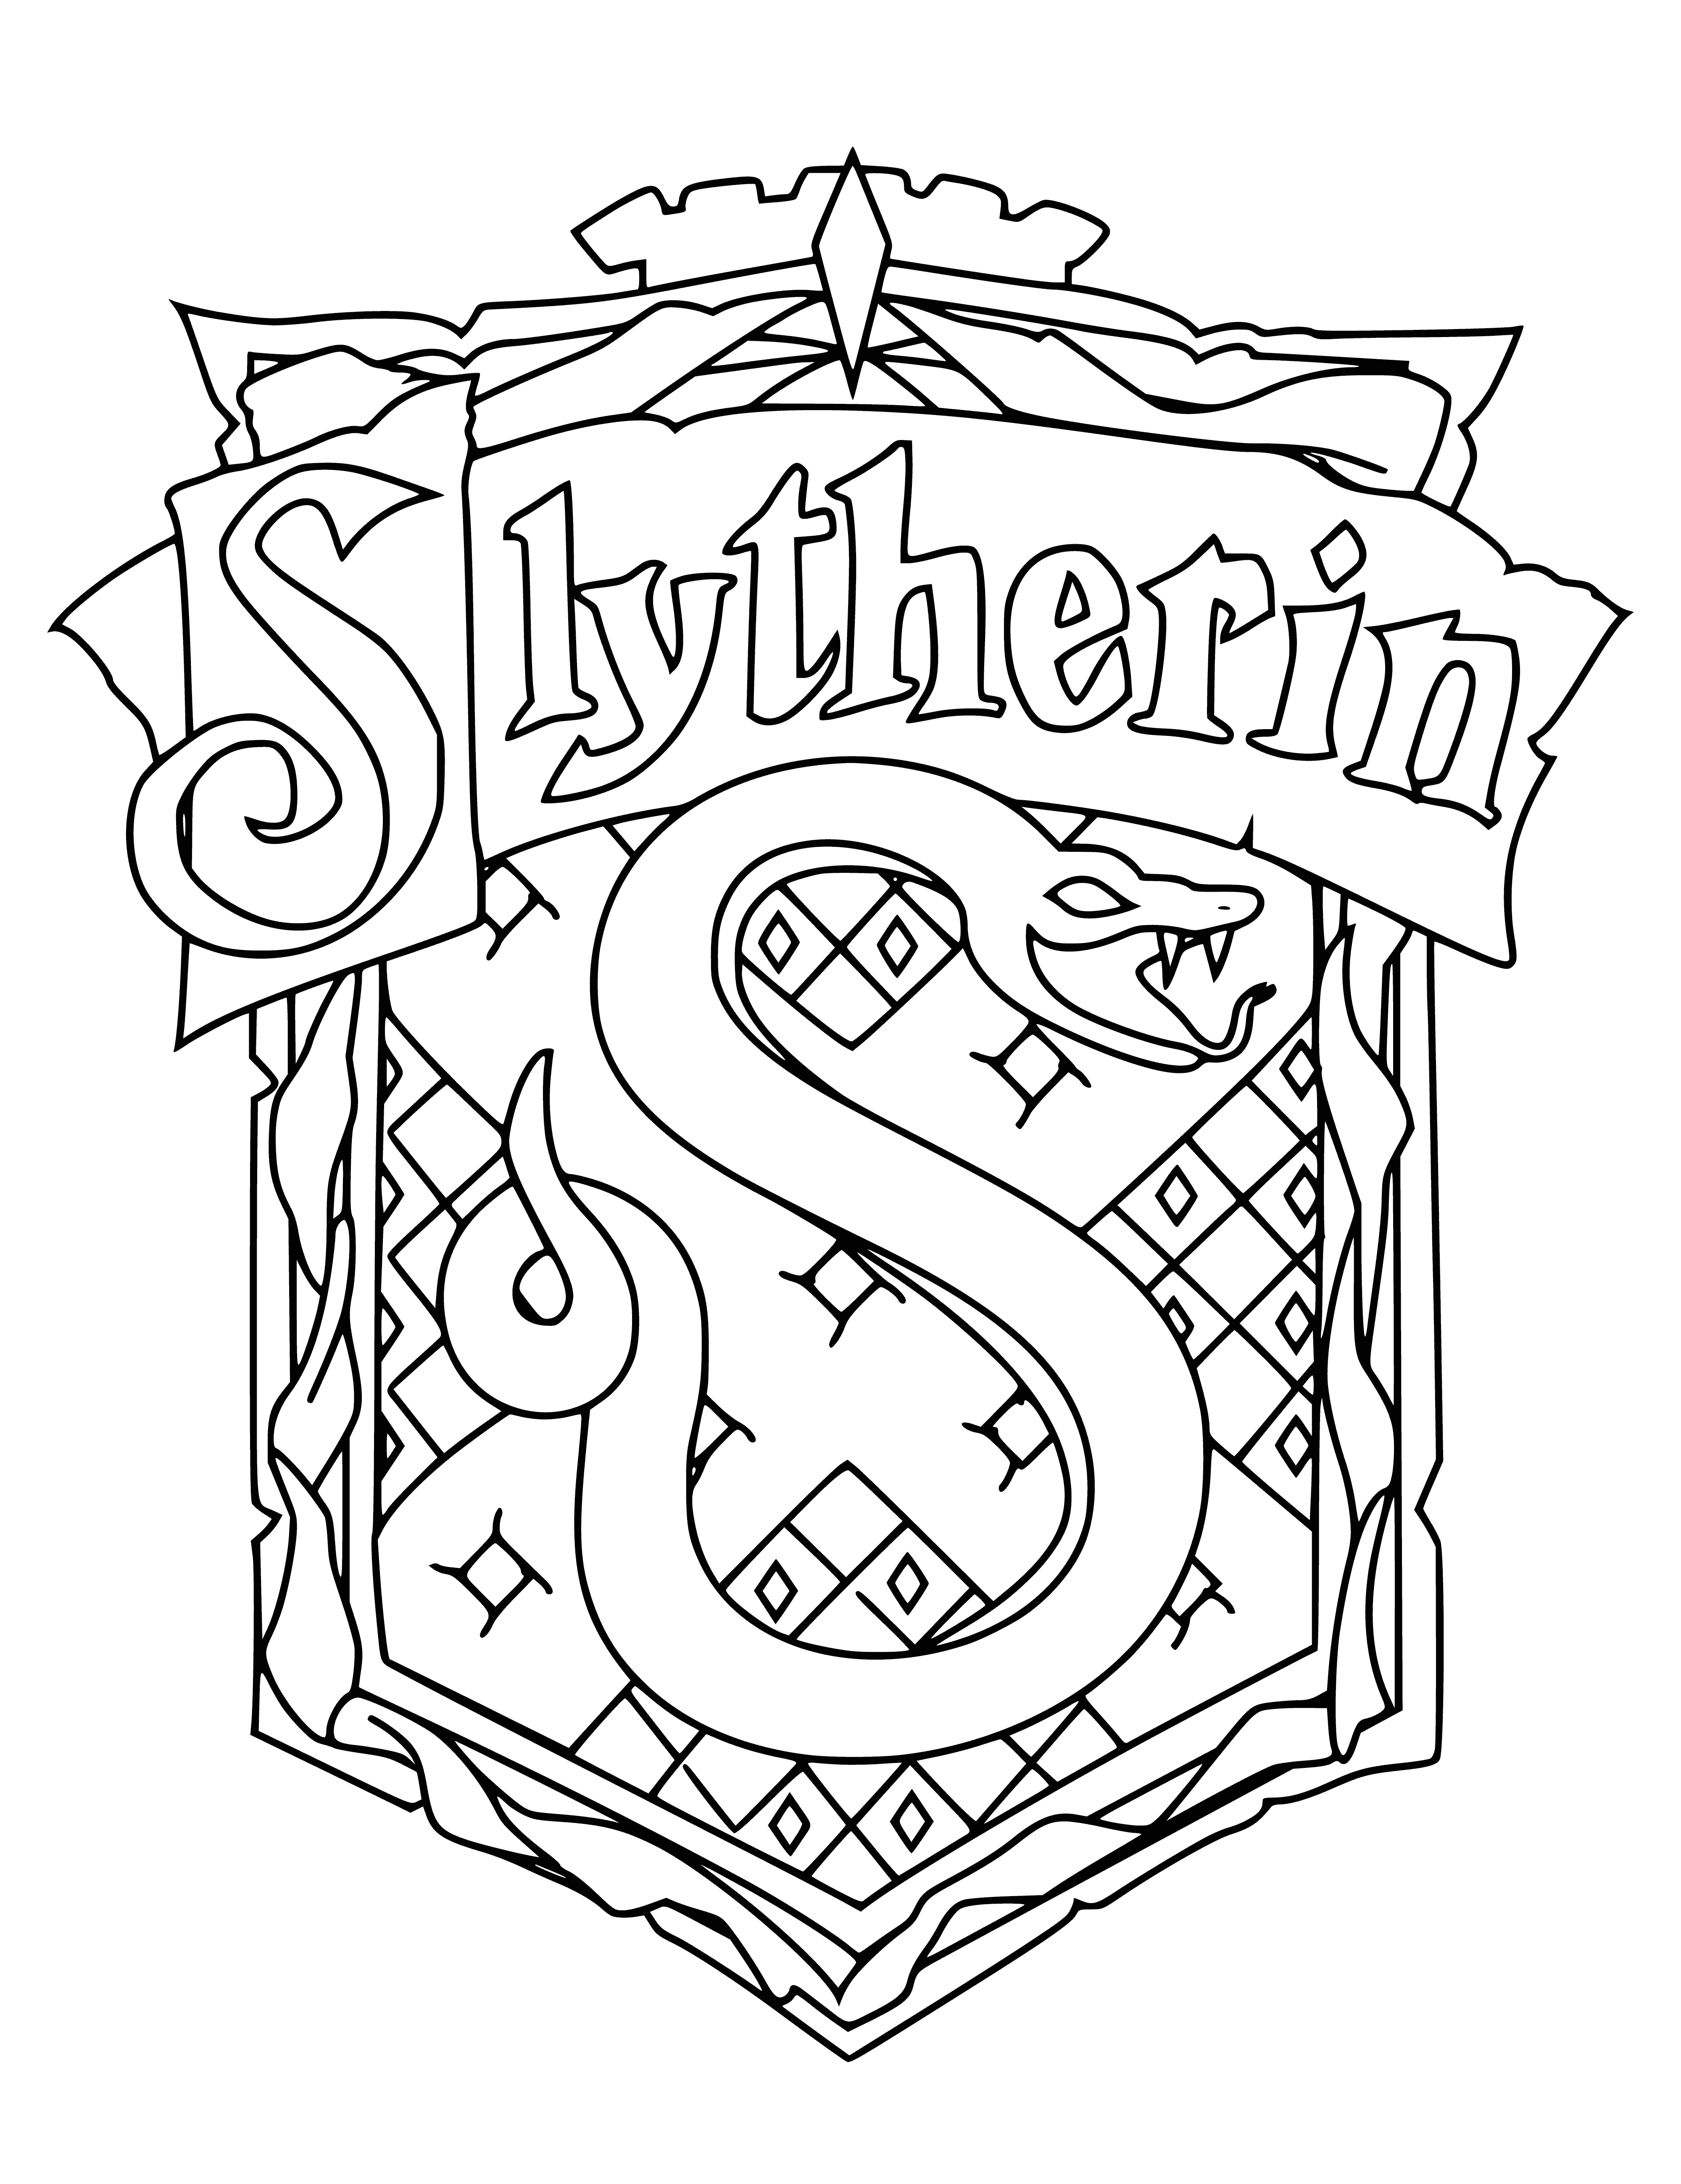 Slytherin House Crest coloring page